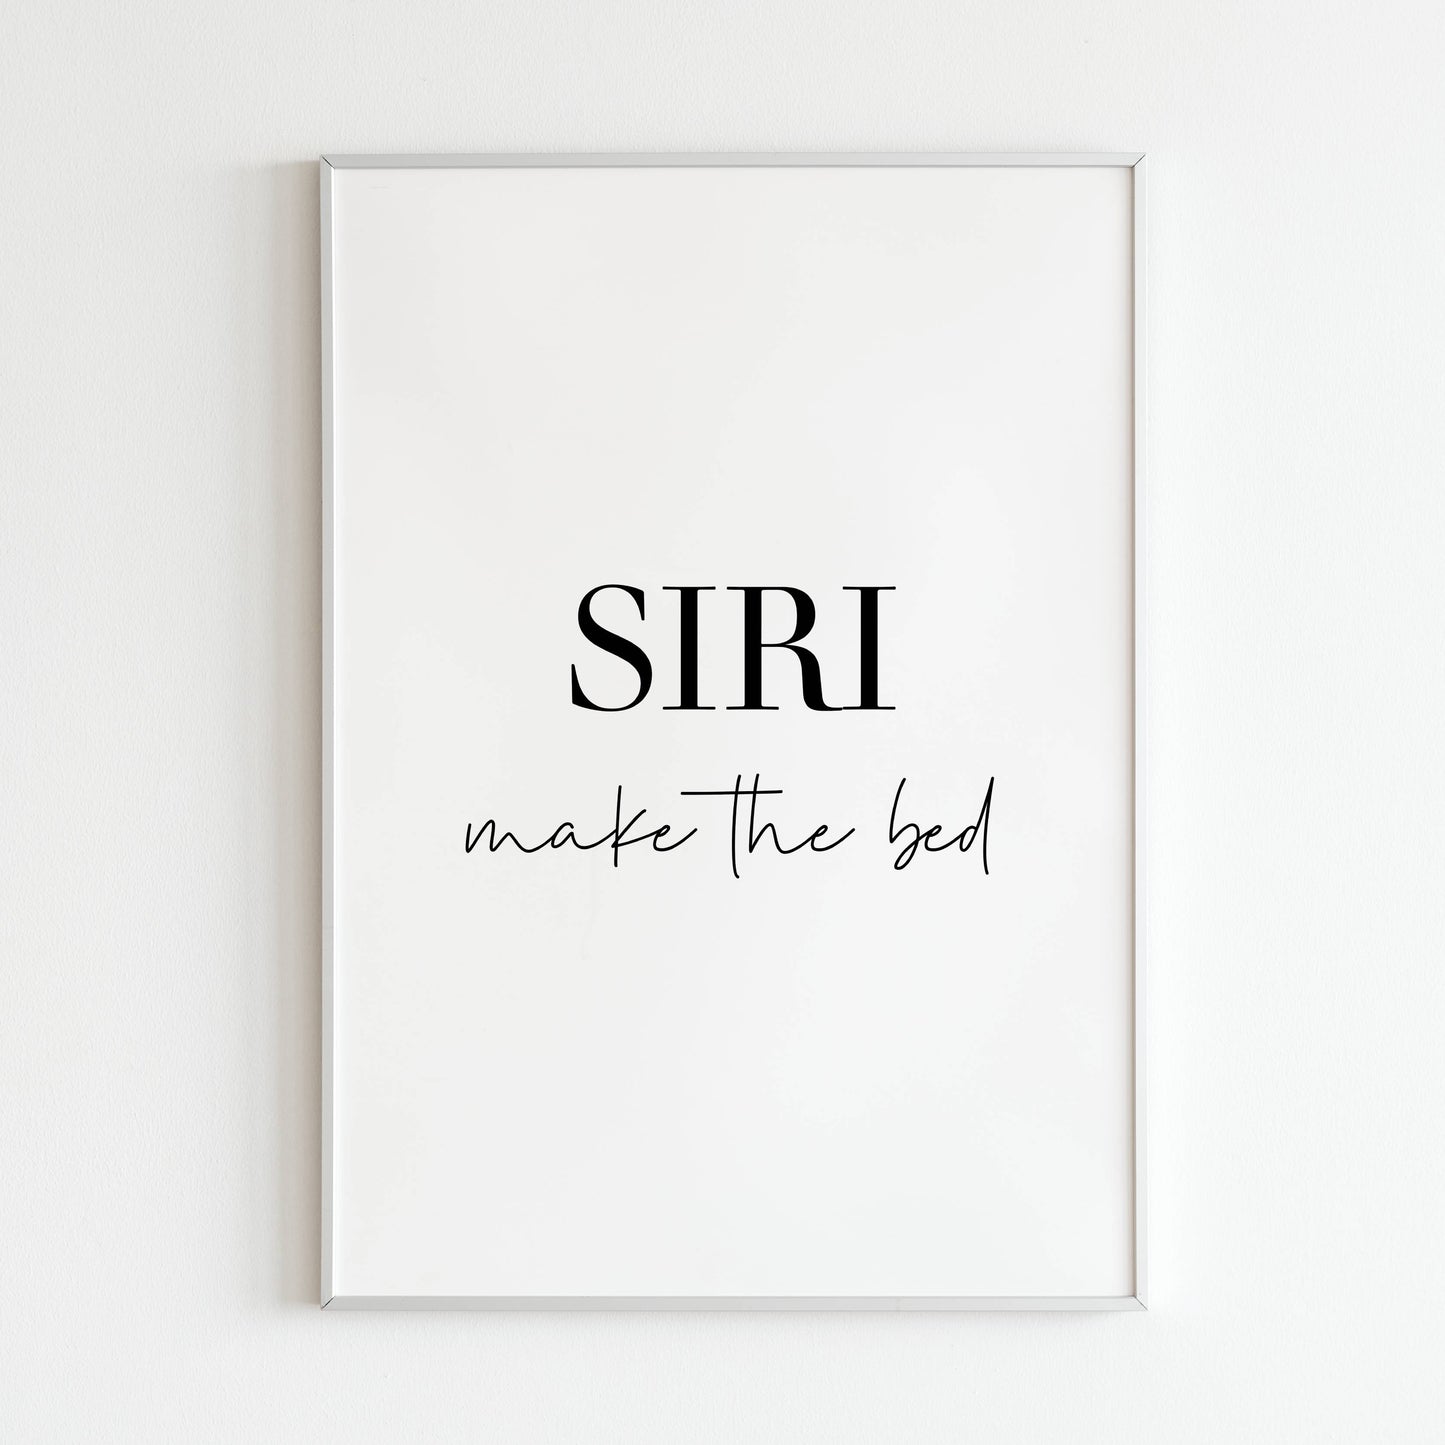 Downloadable "SIRI, make the bed" art print, add a chuckle to your daily routine with a touch of tech humor.Humorous "SIRI, make the bed" printable poster, relatable for anyone who wishes for tech-powered chores.	